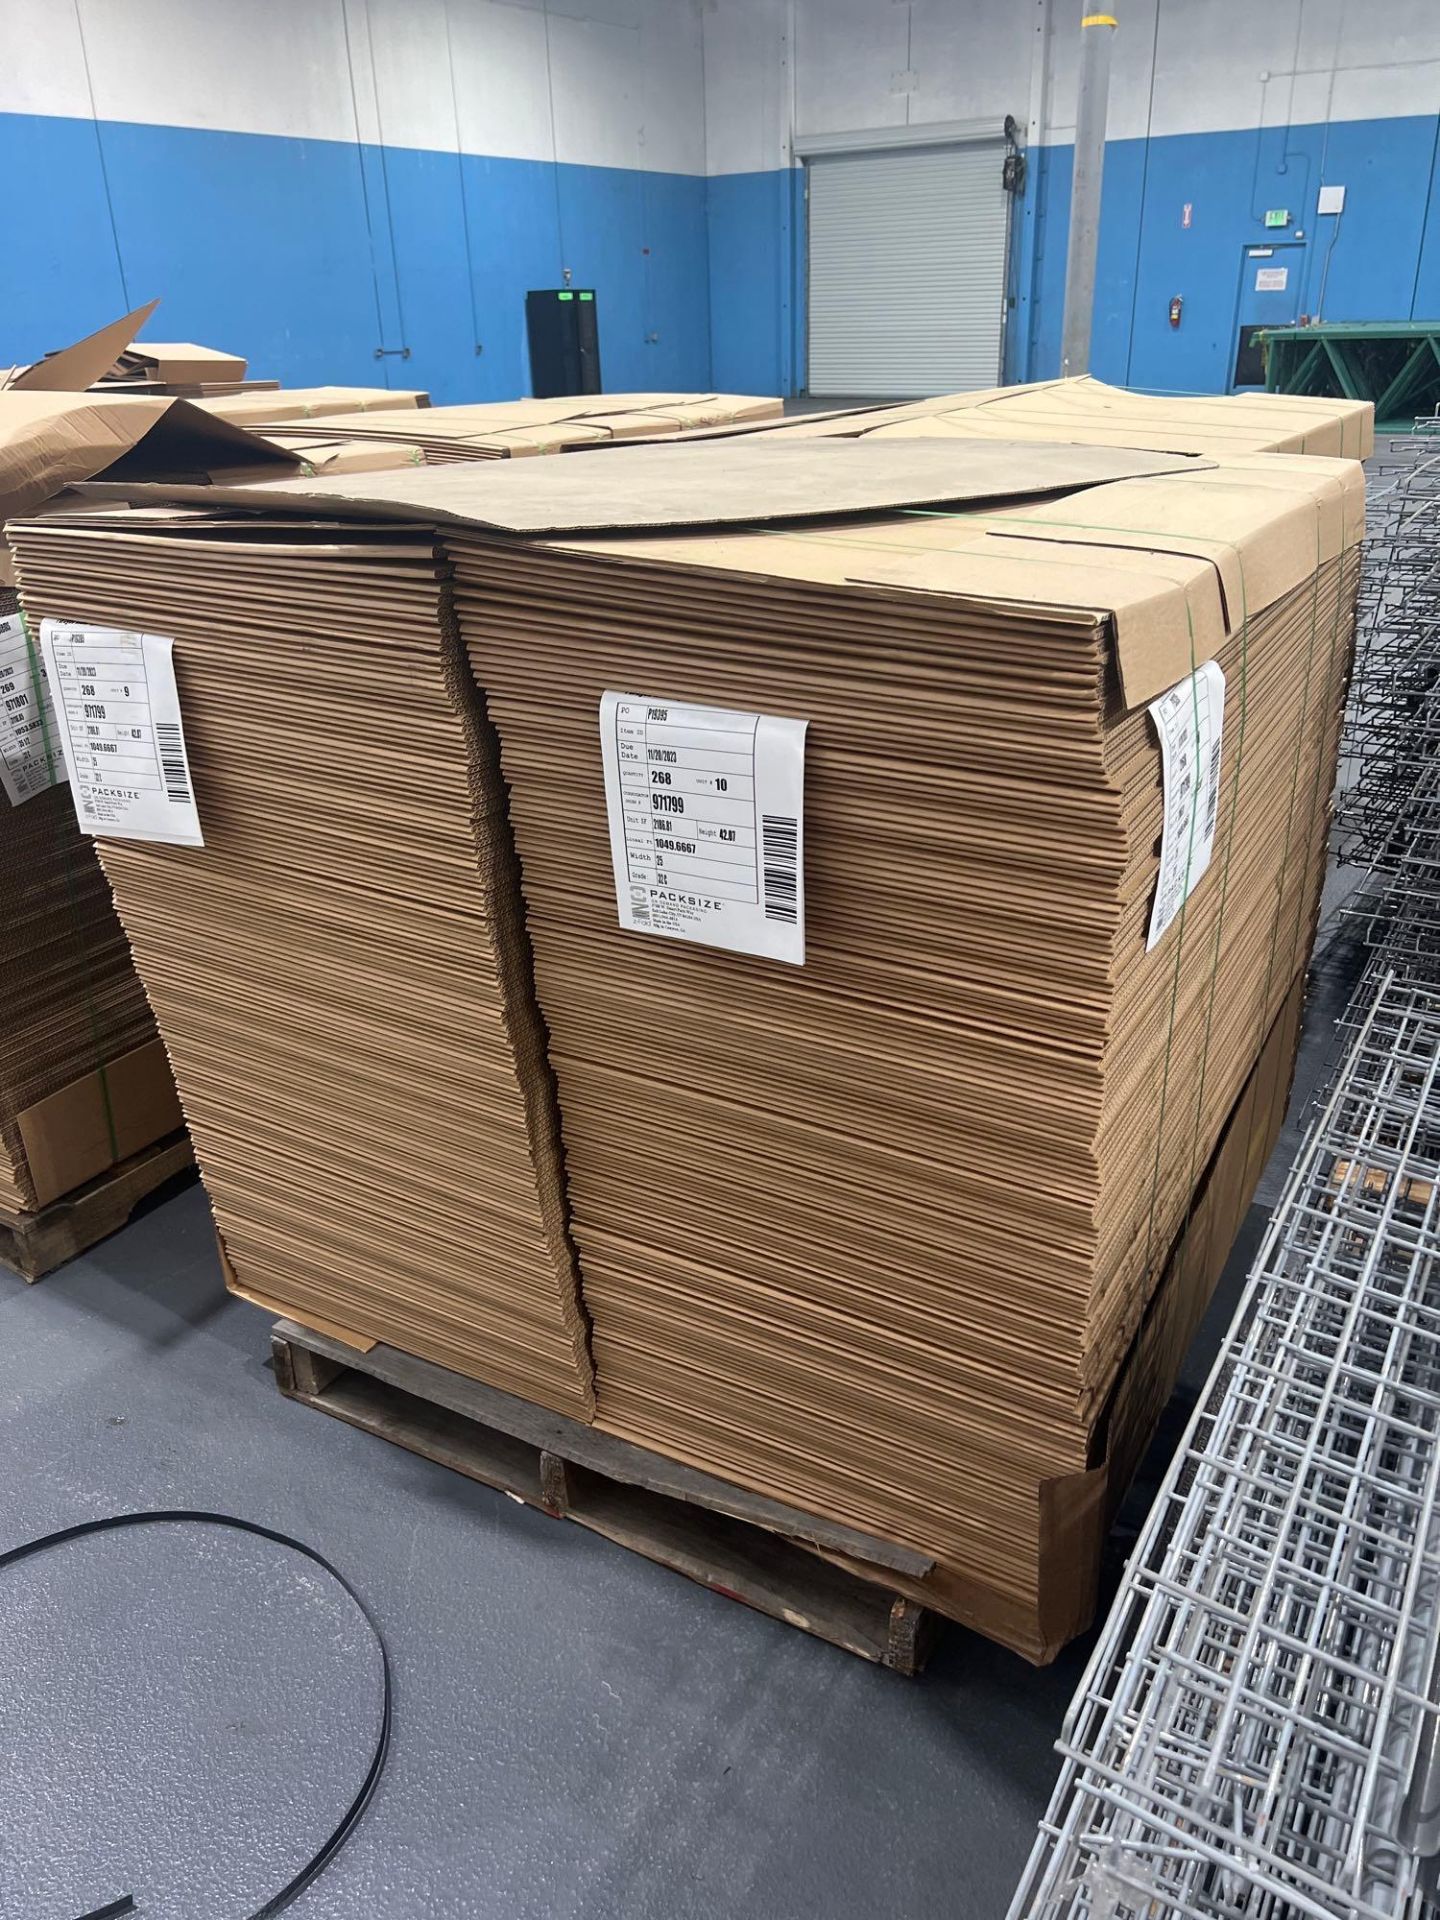 25" BOXESQTY) 6 PALLETS OF 25€ "Z FOLD" BOXES, APPROX. 268 BOXES PER PALLET - Image 4 of 5